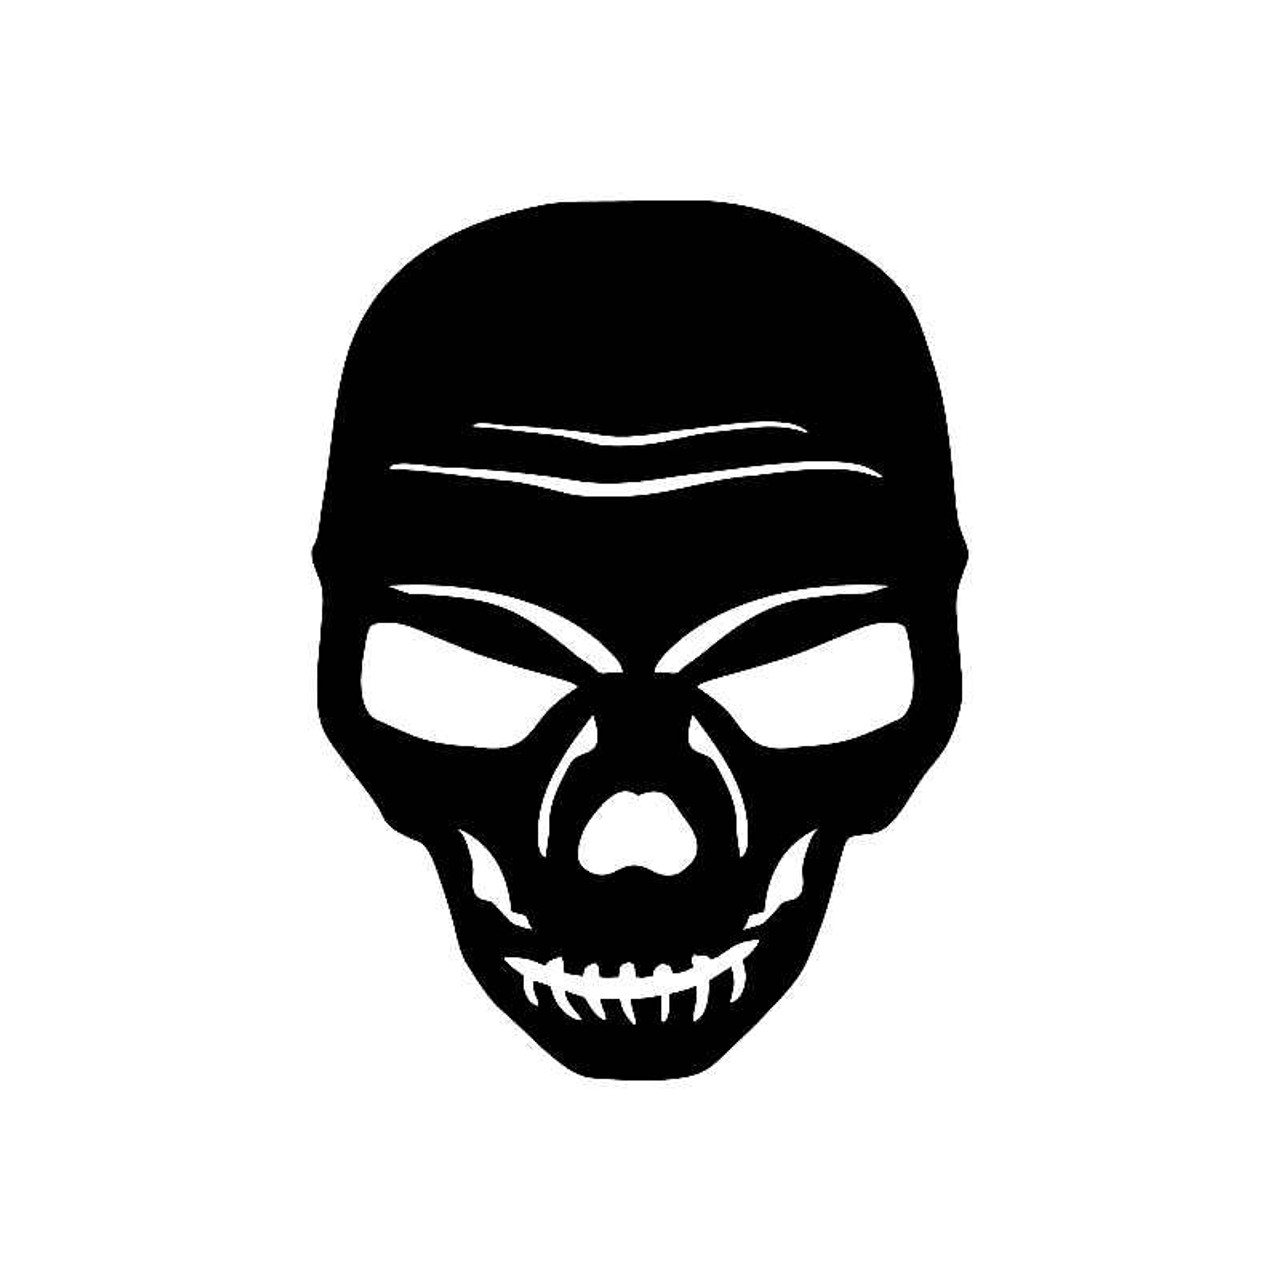 Frowning Skull Jdm Jdm S Decal